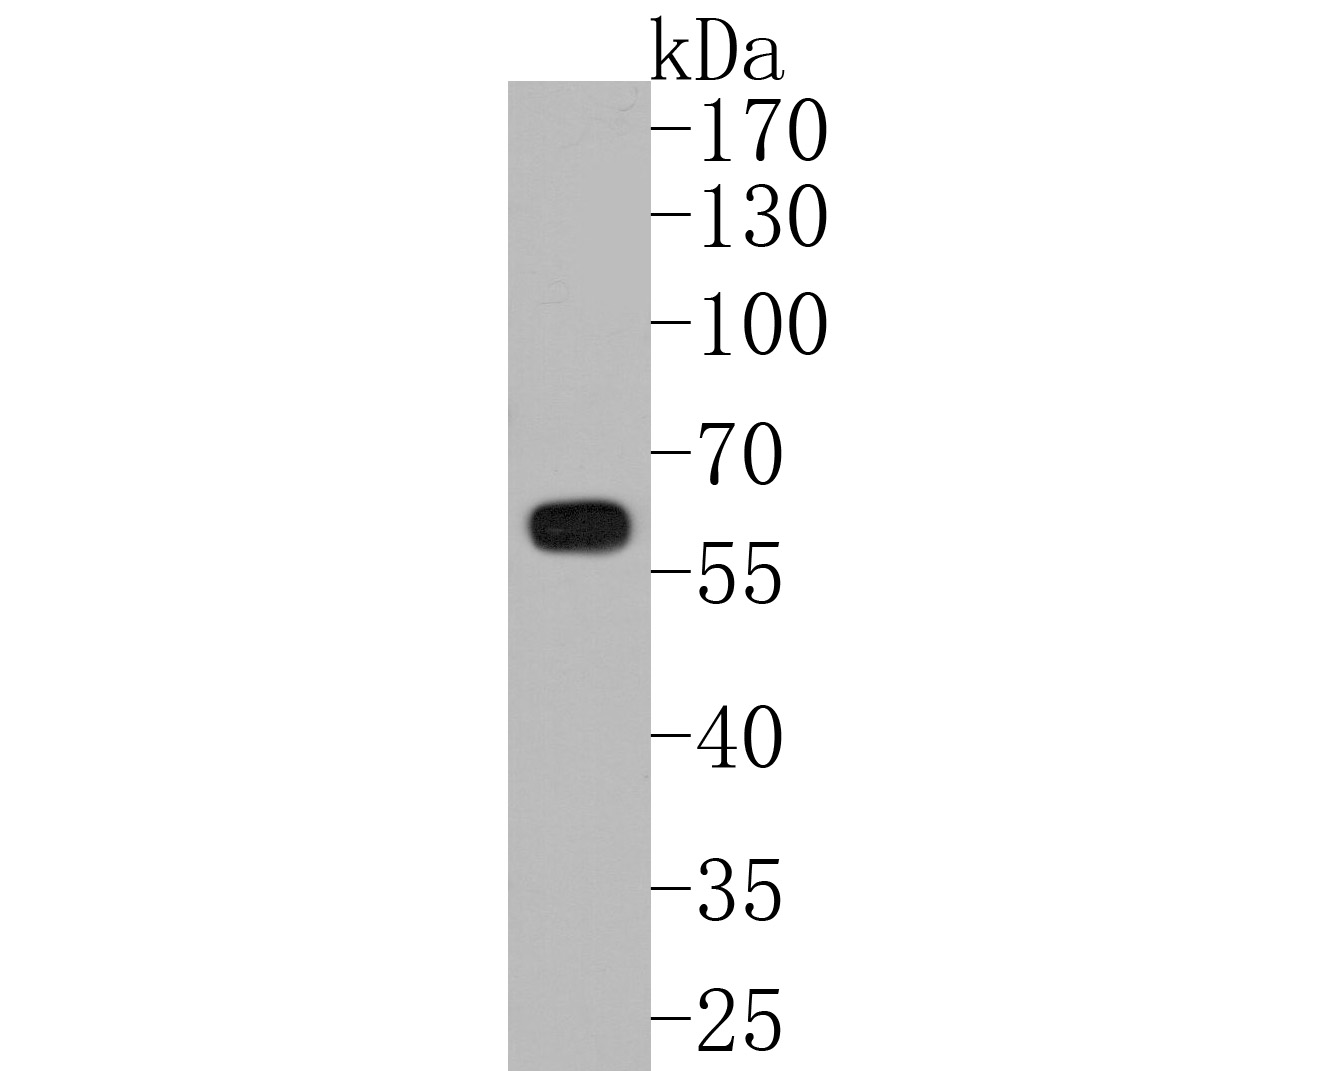 Western blot analysis of IRF5 on THP-1 cell lysates. Proteins were transferred to a PVDF membrane and blocked with 5% BSA in PBS for 1 hour at room temperature. The primary antibody (ET1611-94, 1/500) was used in 5% BSA at room temperature for 2 hours. Goat Anti-Rabbit IgG - HRP Secondary Antibody (HA1001) at 1:200,000 dilution was used for 1 hour at room temperature.